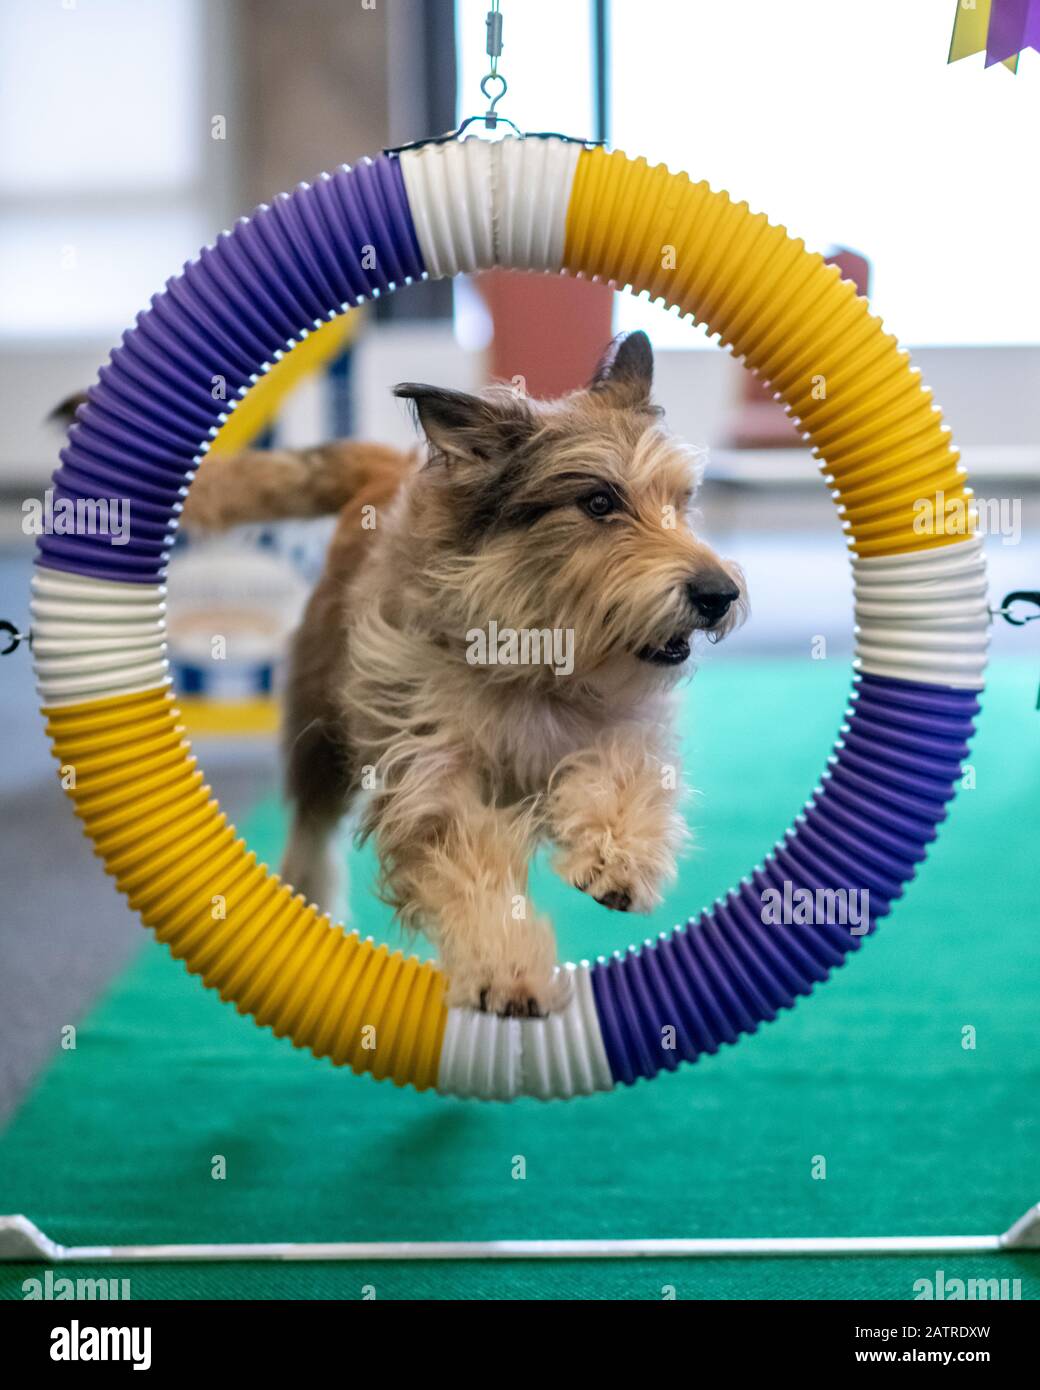 New York, USA. 4th Feb, 2020. Chester, an 8-year-old Berger Picard and five times winner of the Agility competition, demonstrates his abilities during a 'Meet The Breeds' event in the New Yorker hotel in Manhattan, ahead of the 2020 Westminster Kennel Club Dog show . Credit: Enrique Shore/Alamy Live News Stock Photo